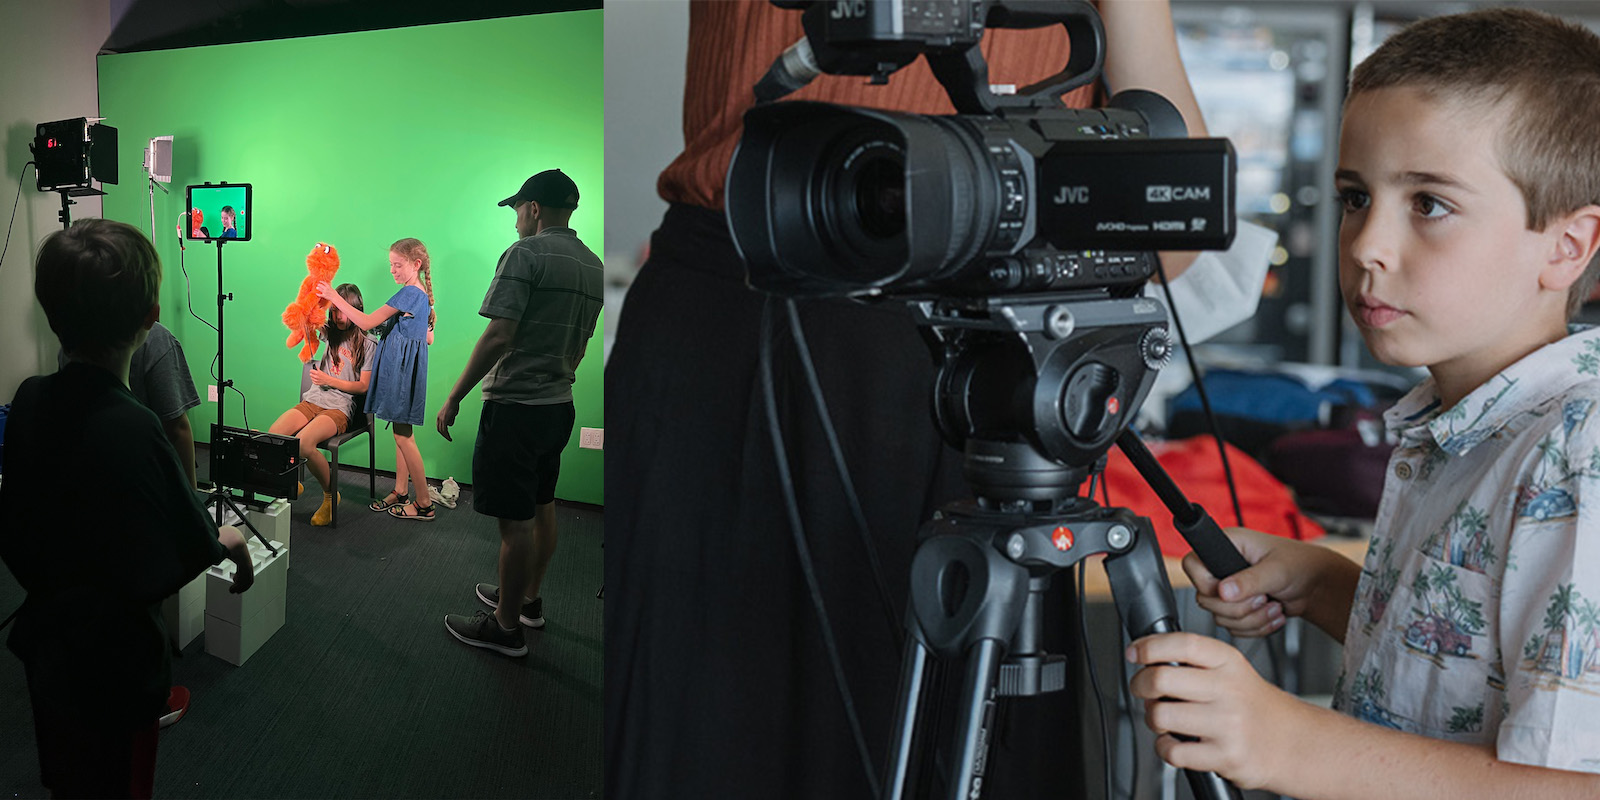 A diptych of images: on the left, two children with long hair hold an orange puppet in front of a green screen in a film studio; they are also on a monitor in front of them, with the silhouette of a child with short hair standing with his back to the camera in the foreground; an older person, perhaps a teacher, stands to the right; on the right side image, a young boy with short hair stands behind a video camera and looks through the viewfinder